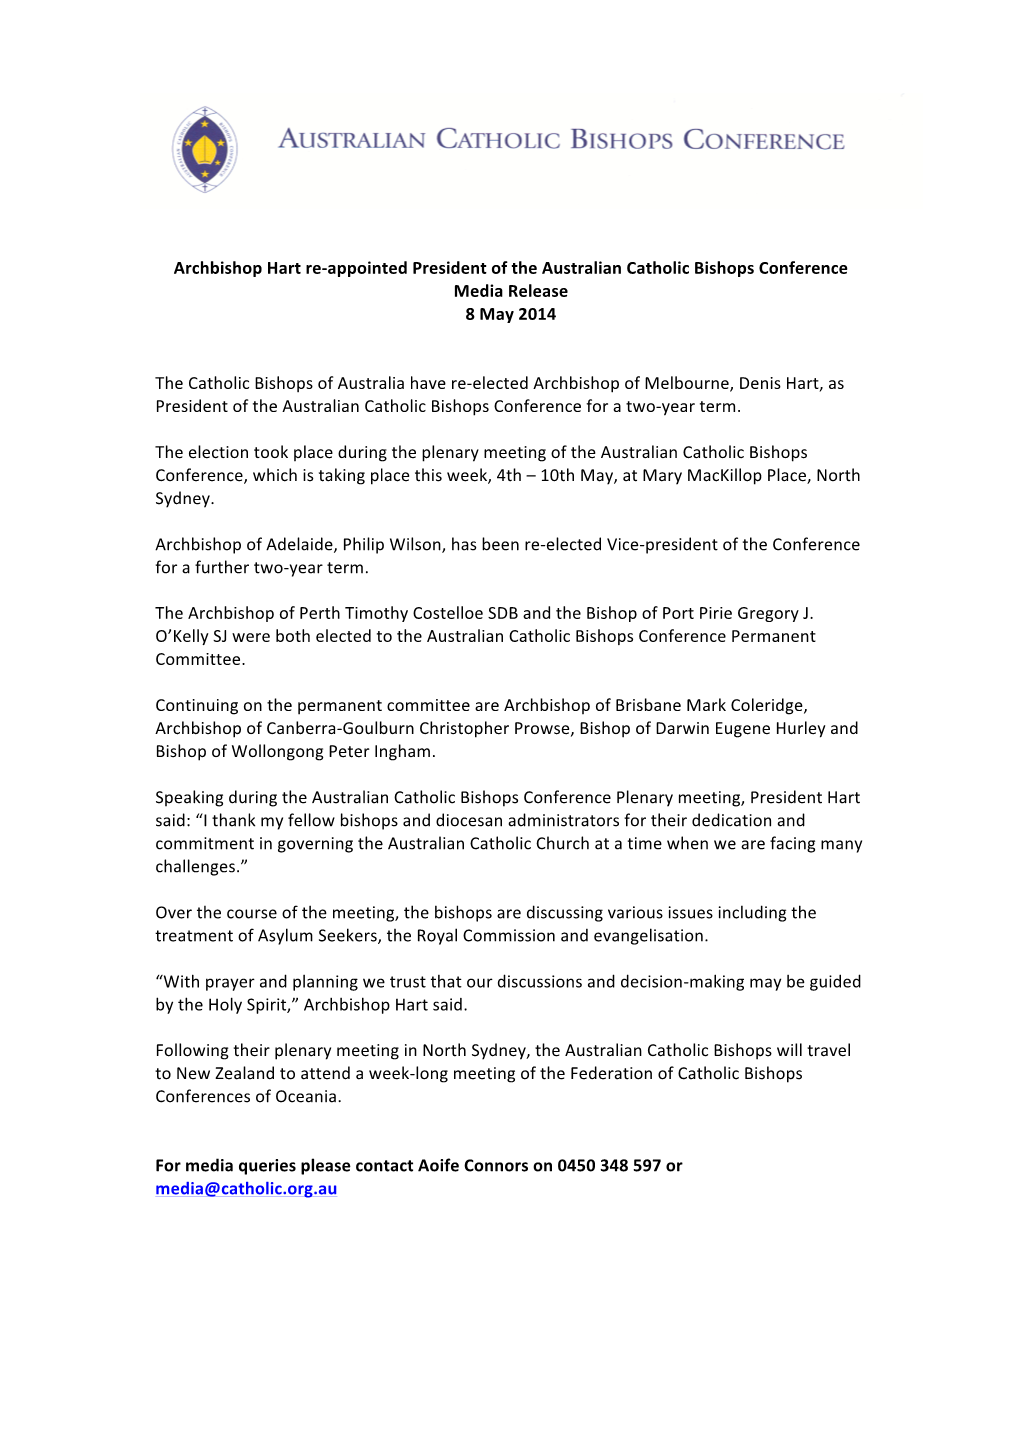 Archbishop Hart Re-Appointed President of the Australian Catholic Bishops Conference Media Release 8 May 2014